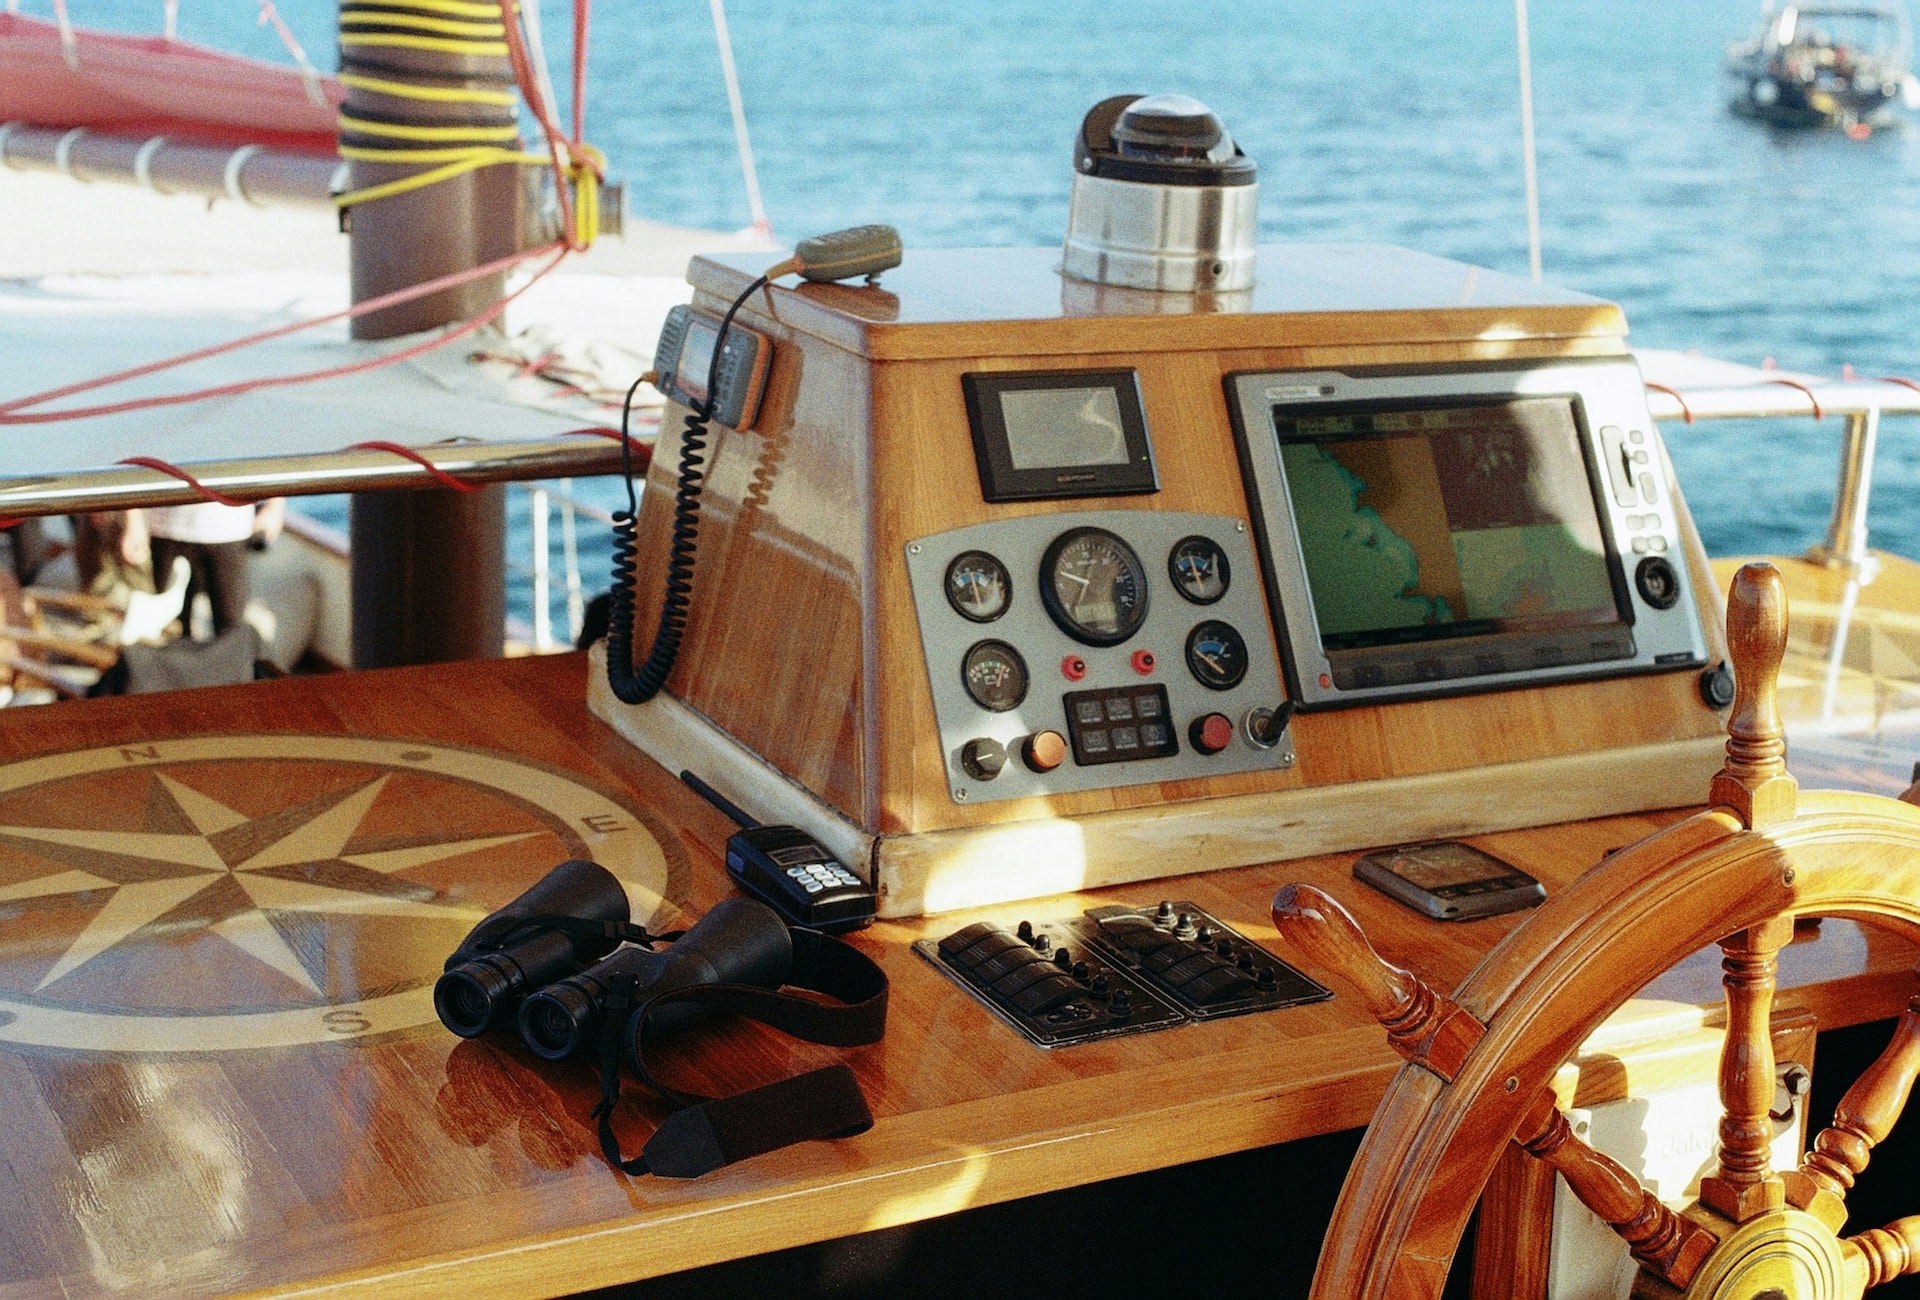 Navigation technology and on-board instruments